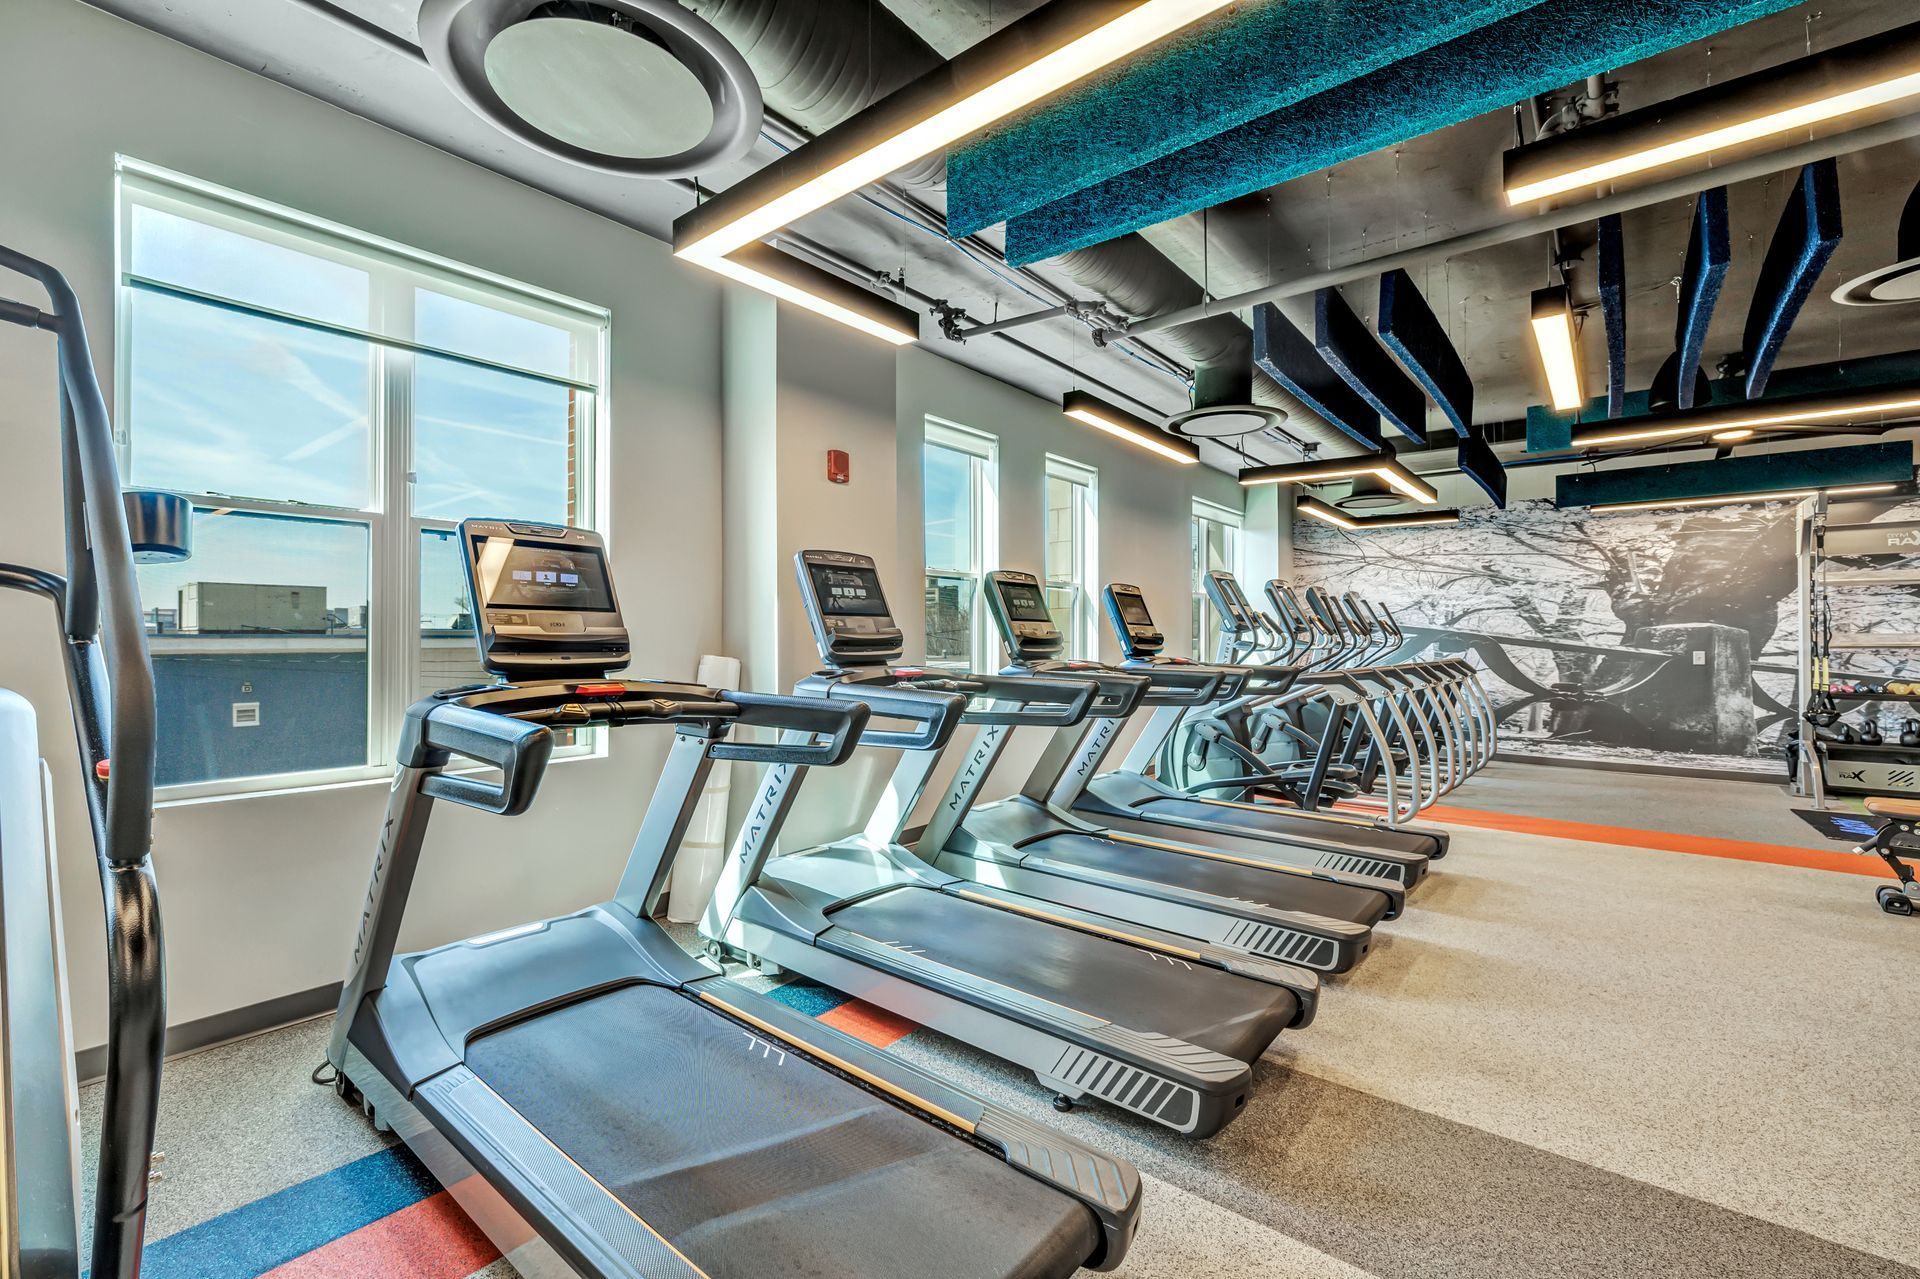 Fitness center with studio space at Olive and Wooster.